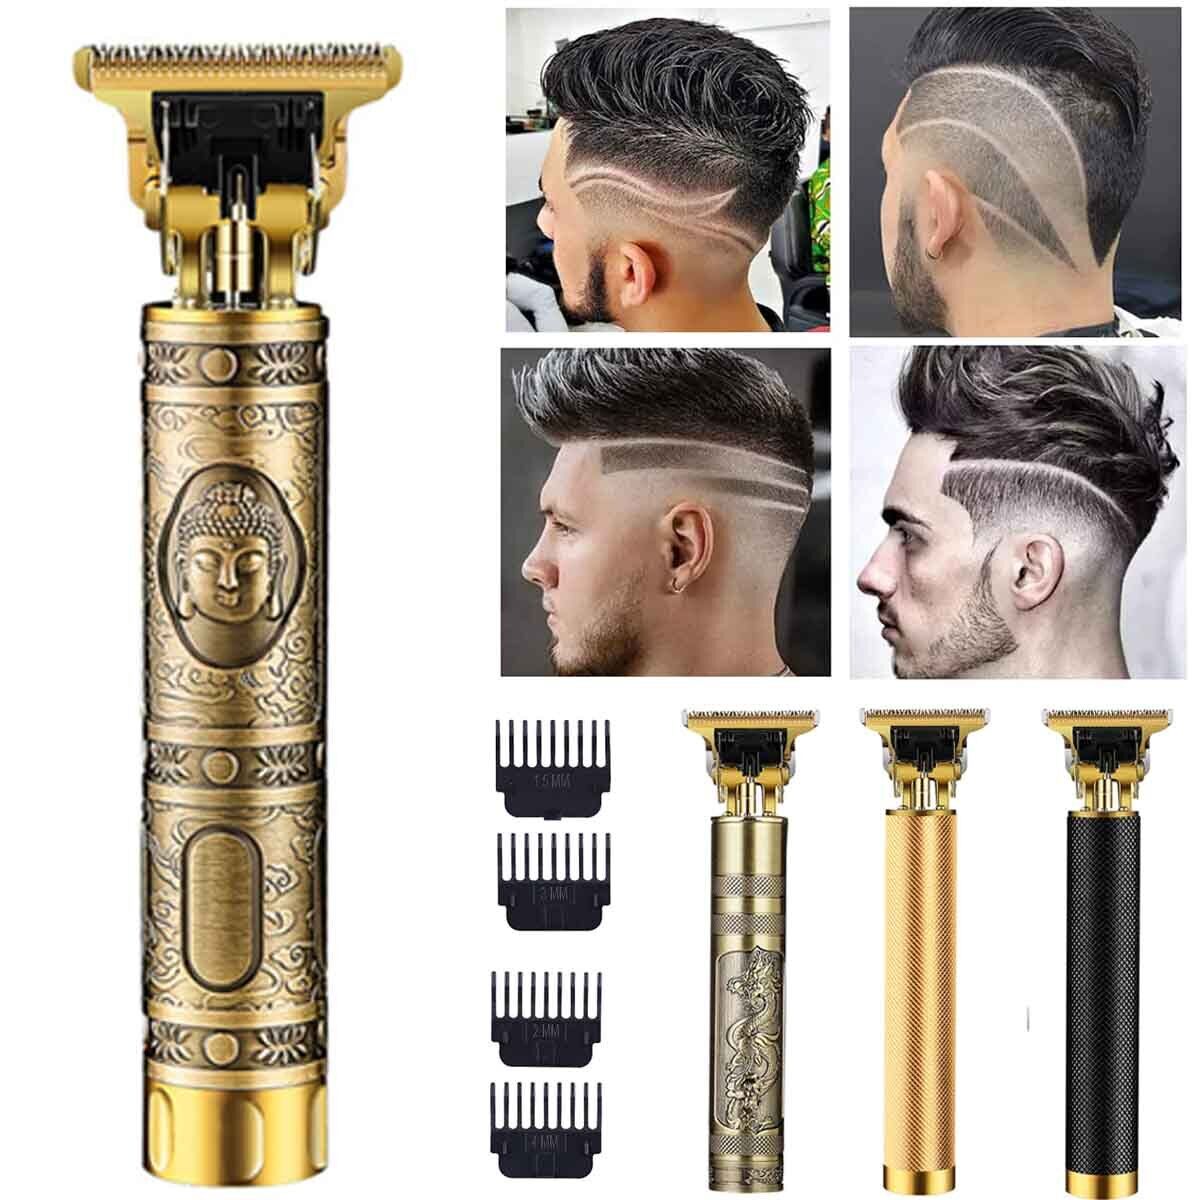 Clippers Beard Trimmer For Men, Hair Cutting T Outliner Blad